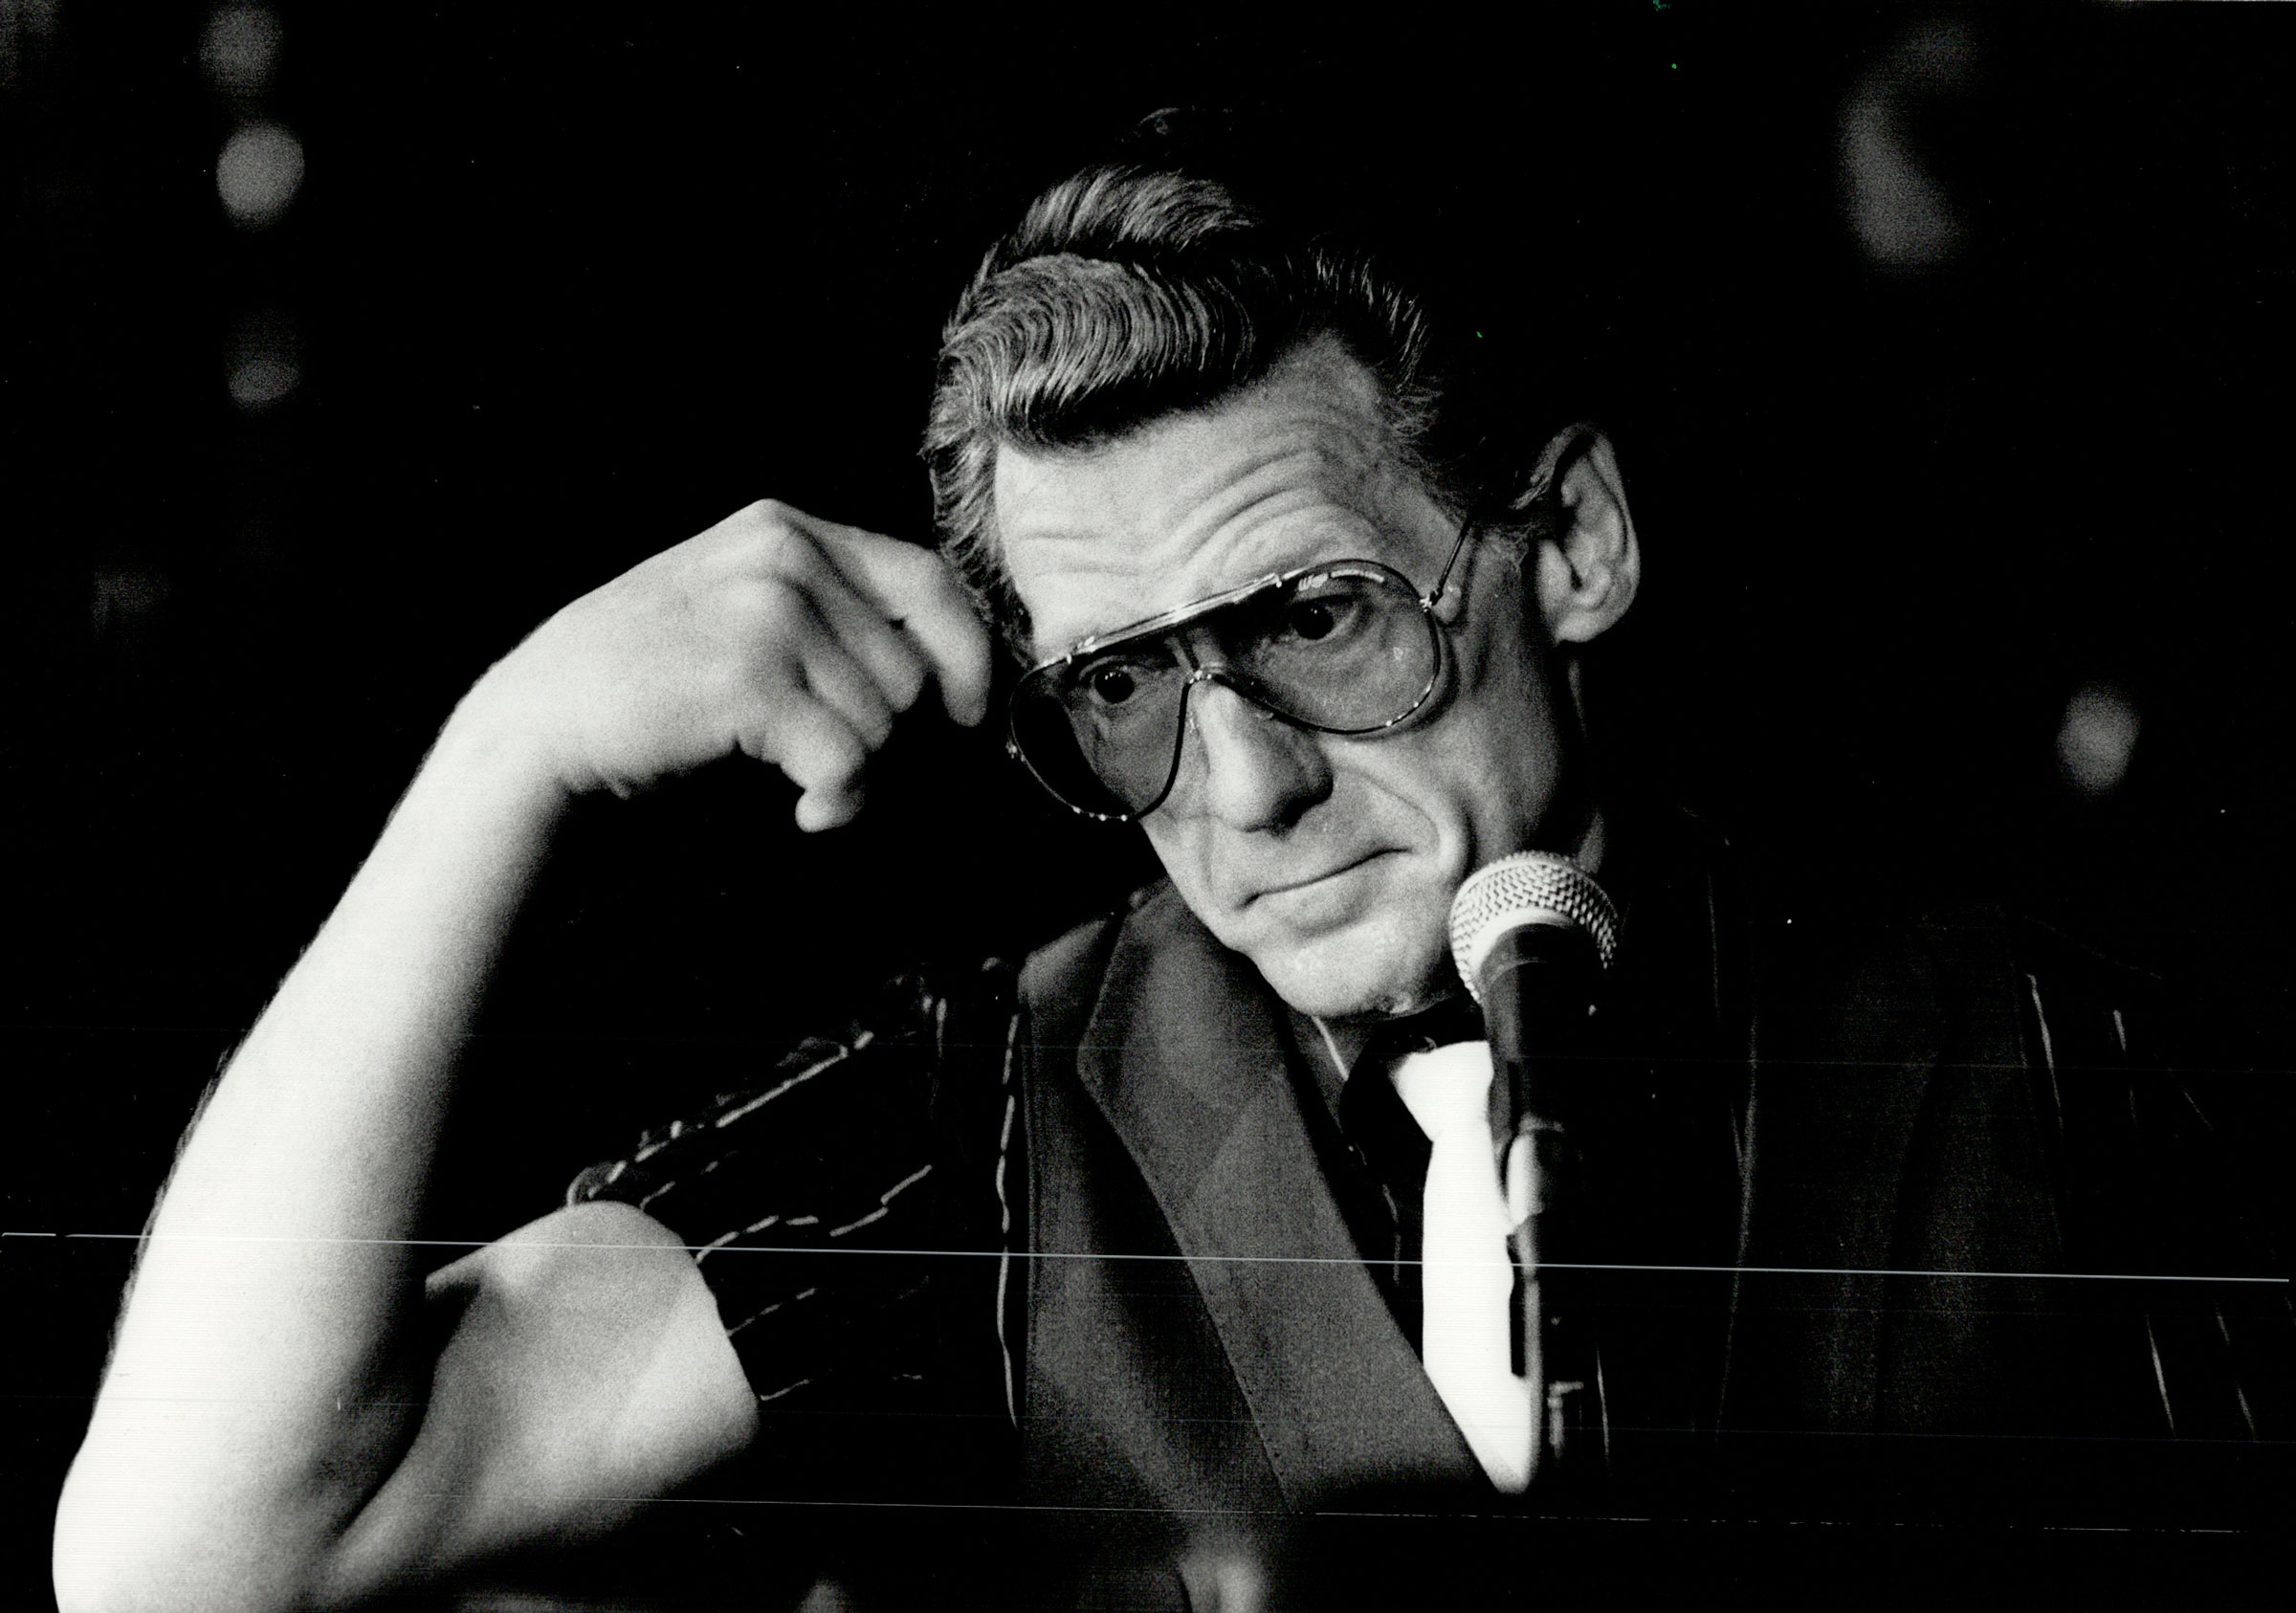 Jerry Lee Lewis at the Royal York Hotel’s Imperial Room in Toronto, in 1987.